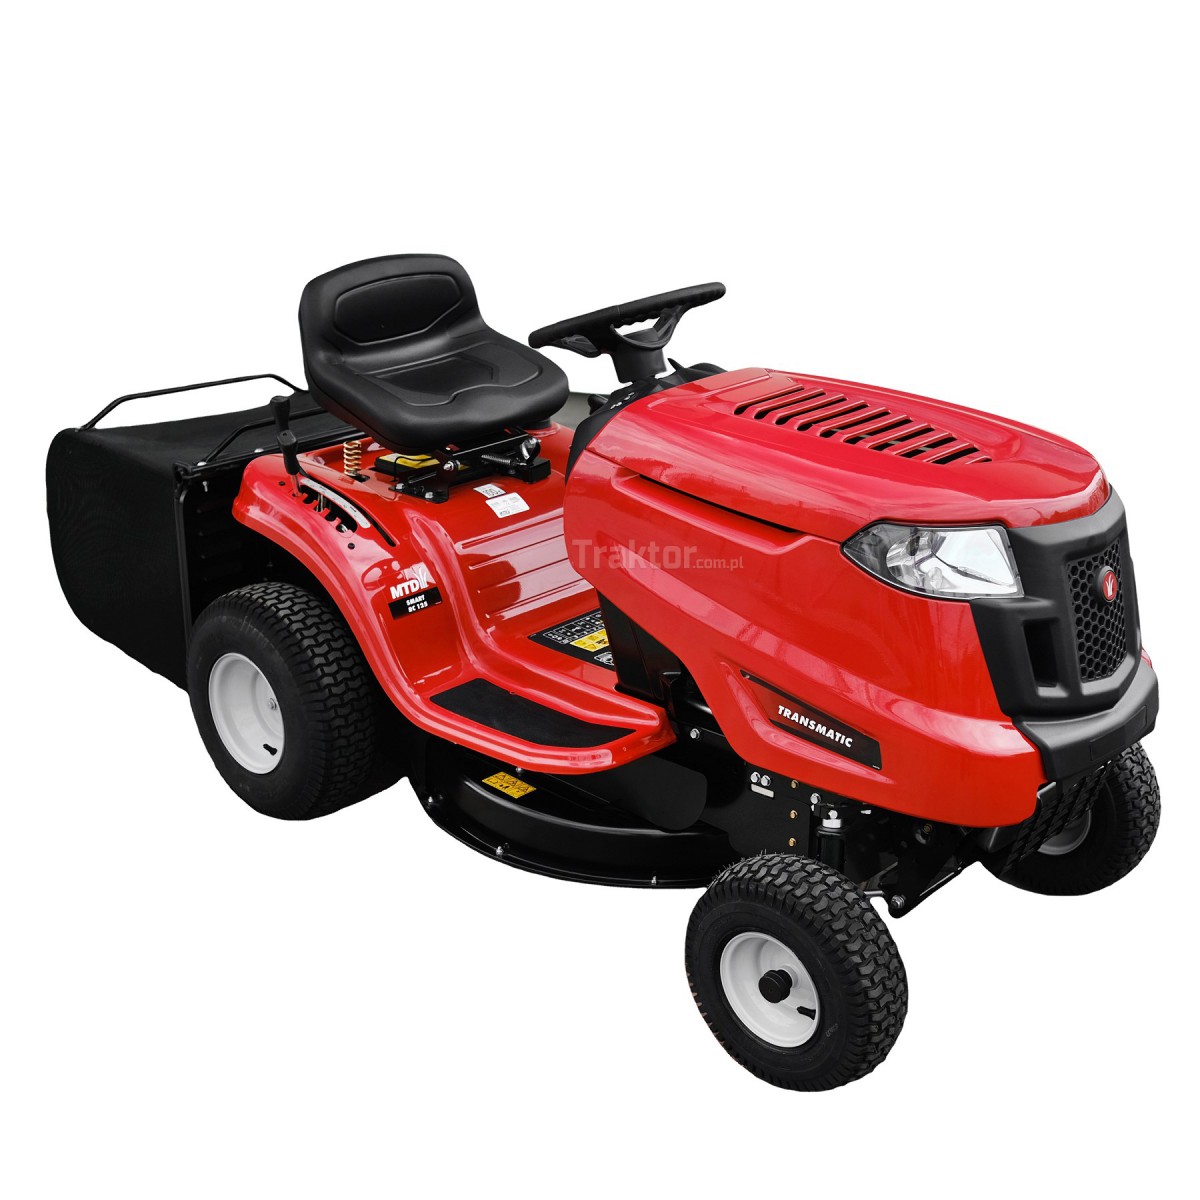 MTD produces tractors, mowers, brushcutters and garden tools.